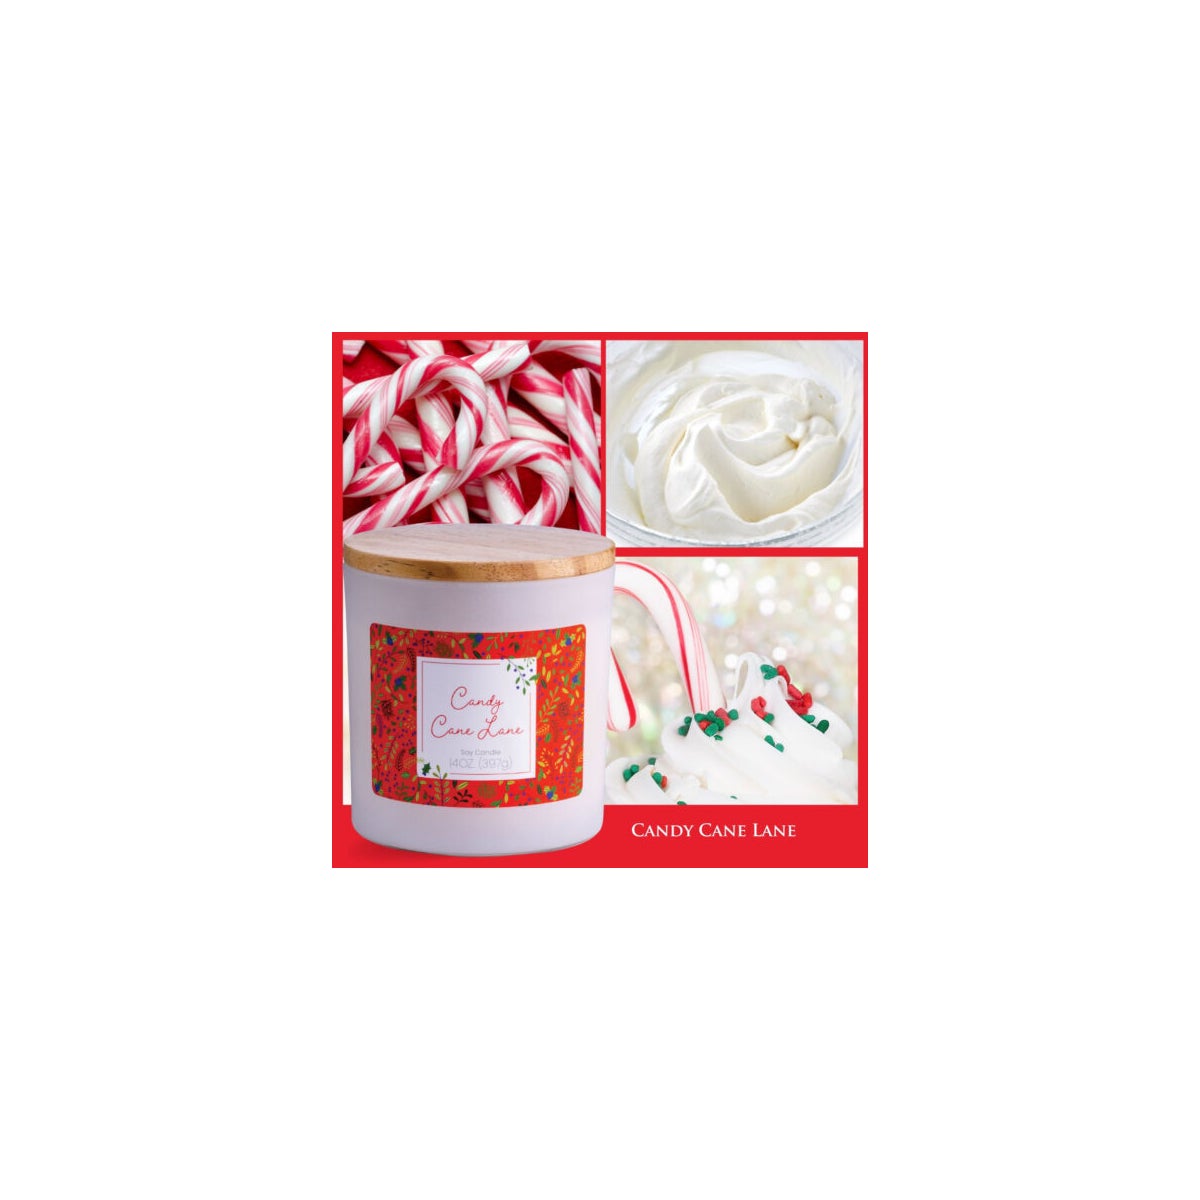 Limited Edition Holiday Candle - Candy Cane Lane